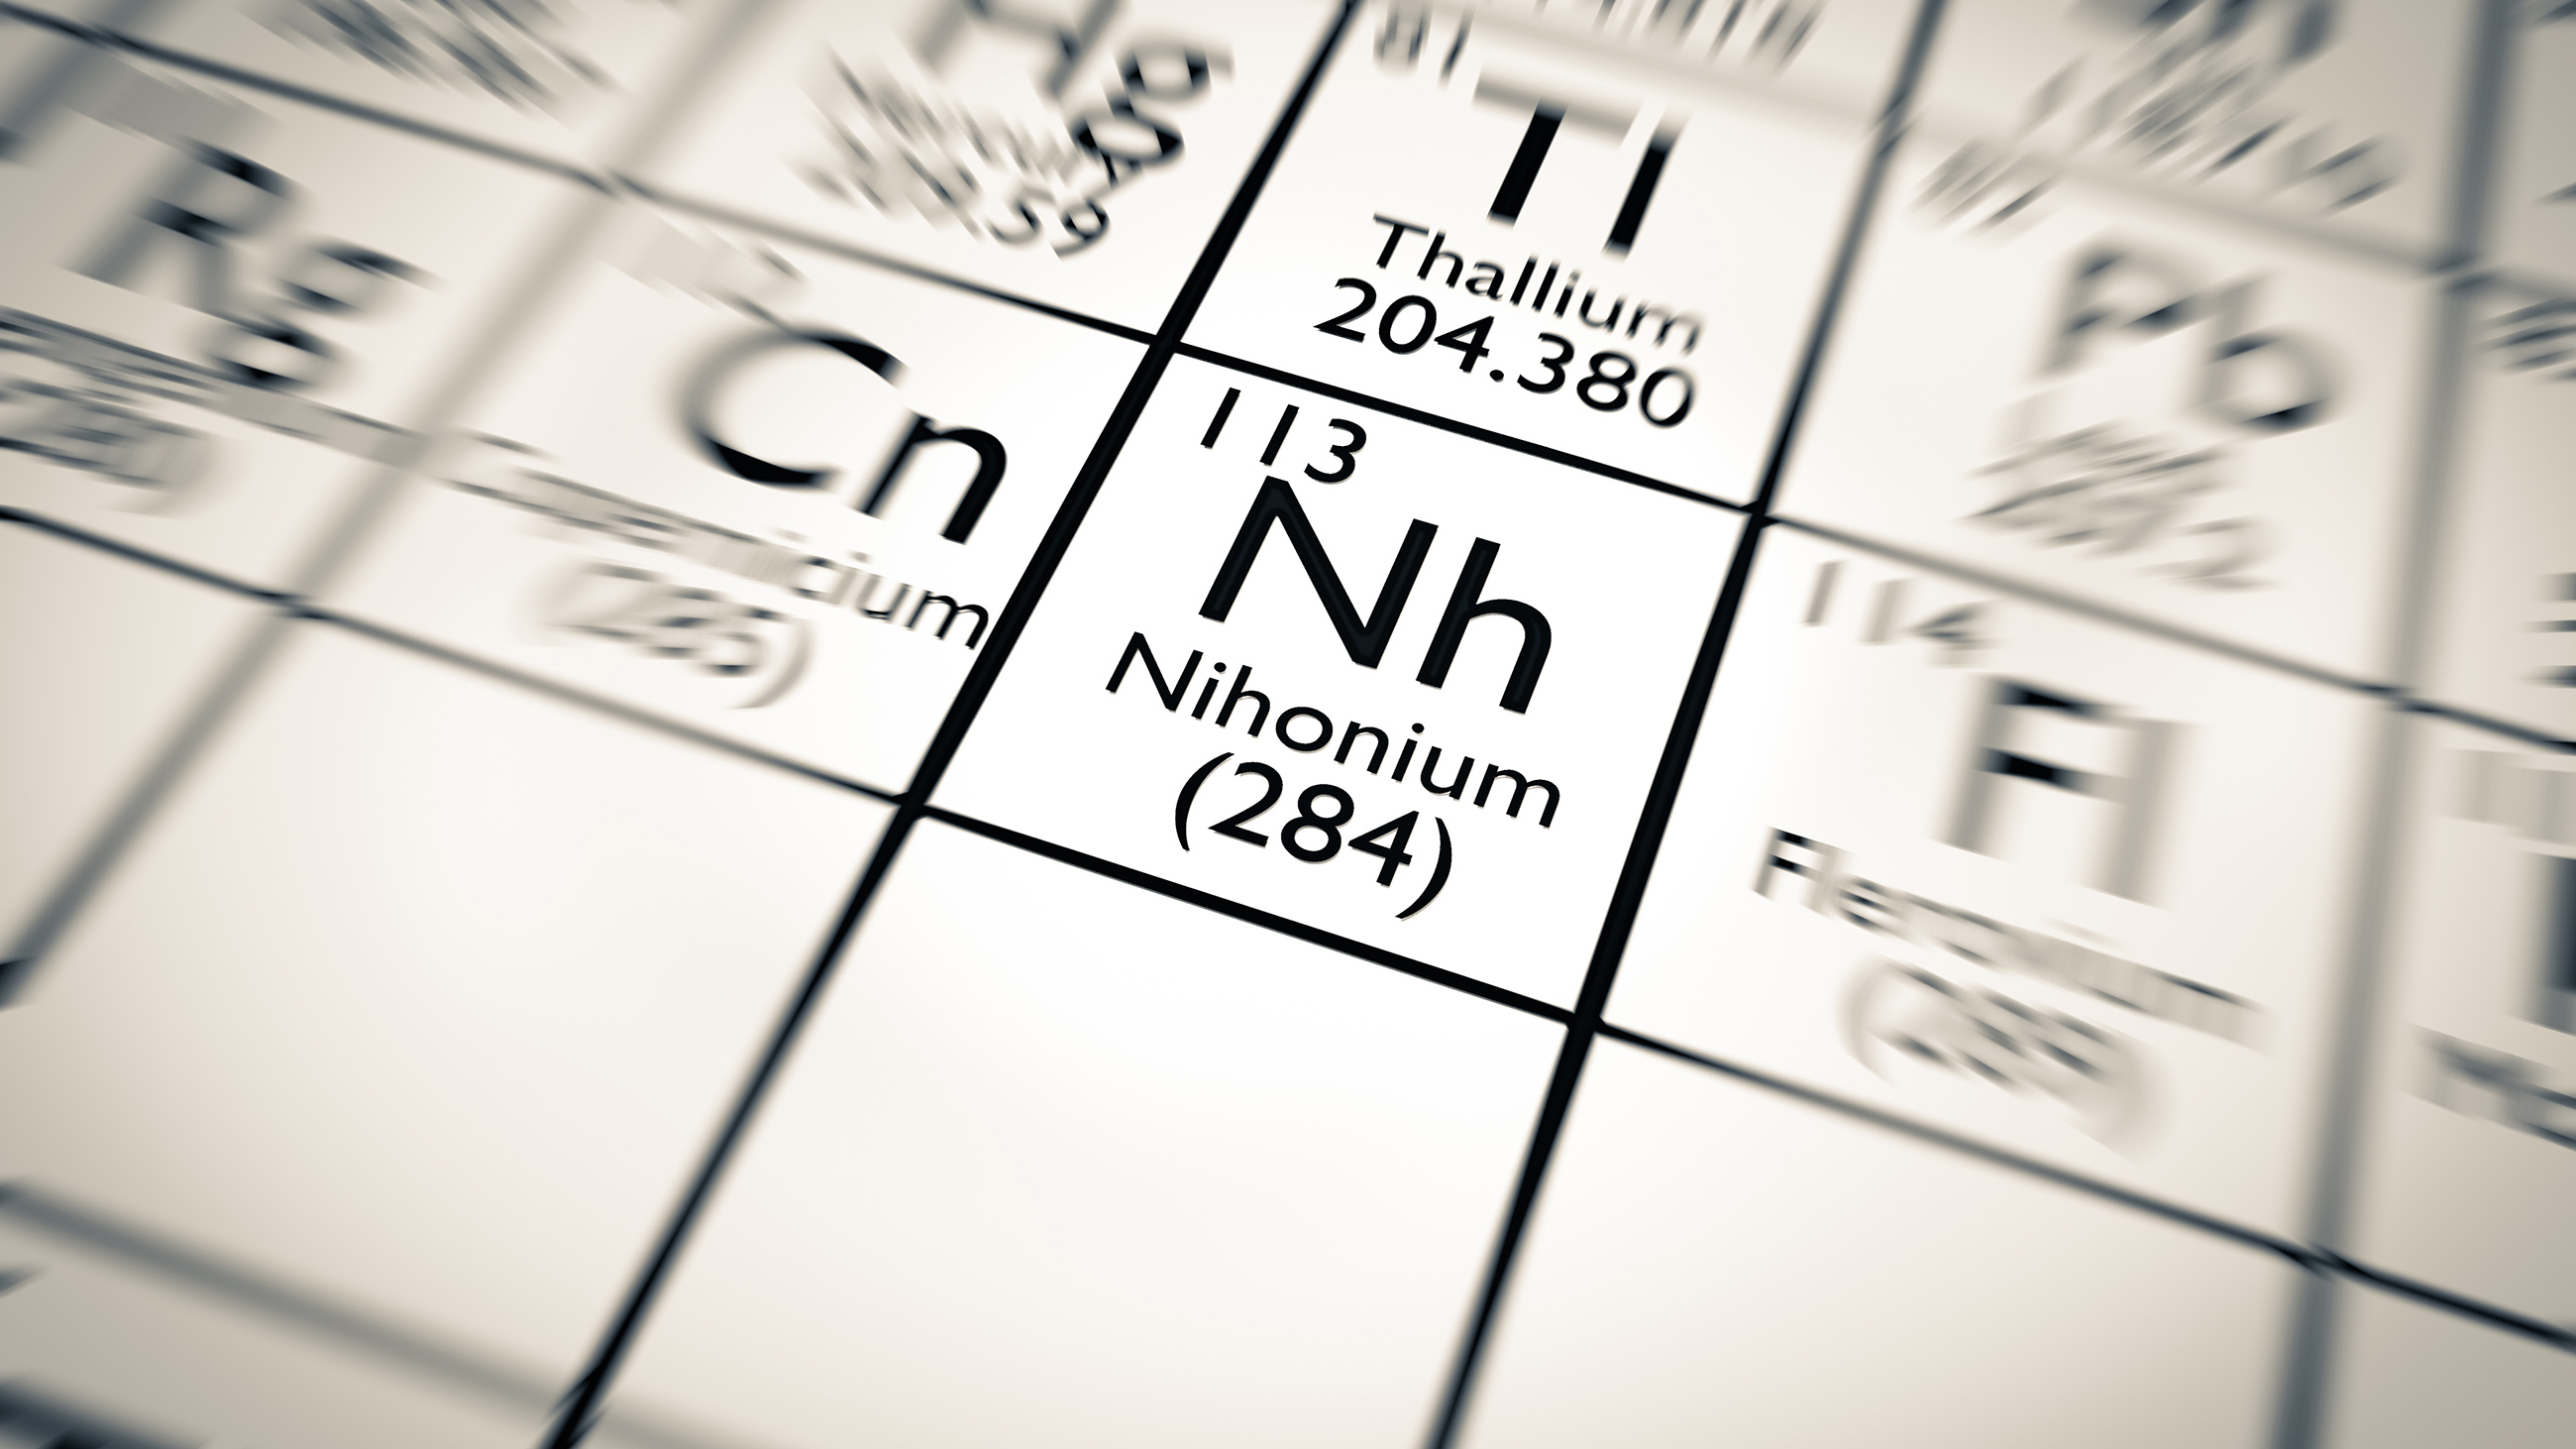 Meet Nihonium (Nh), moscovium (Mc), tennessine (Ts), and oganesson (Og) — the four most recent additions to the periodic table.